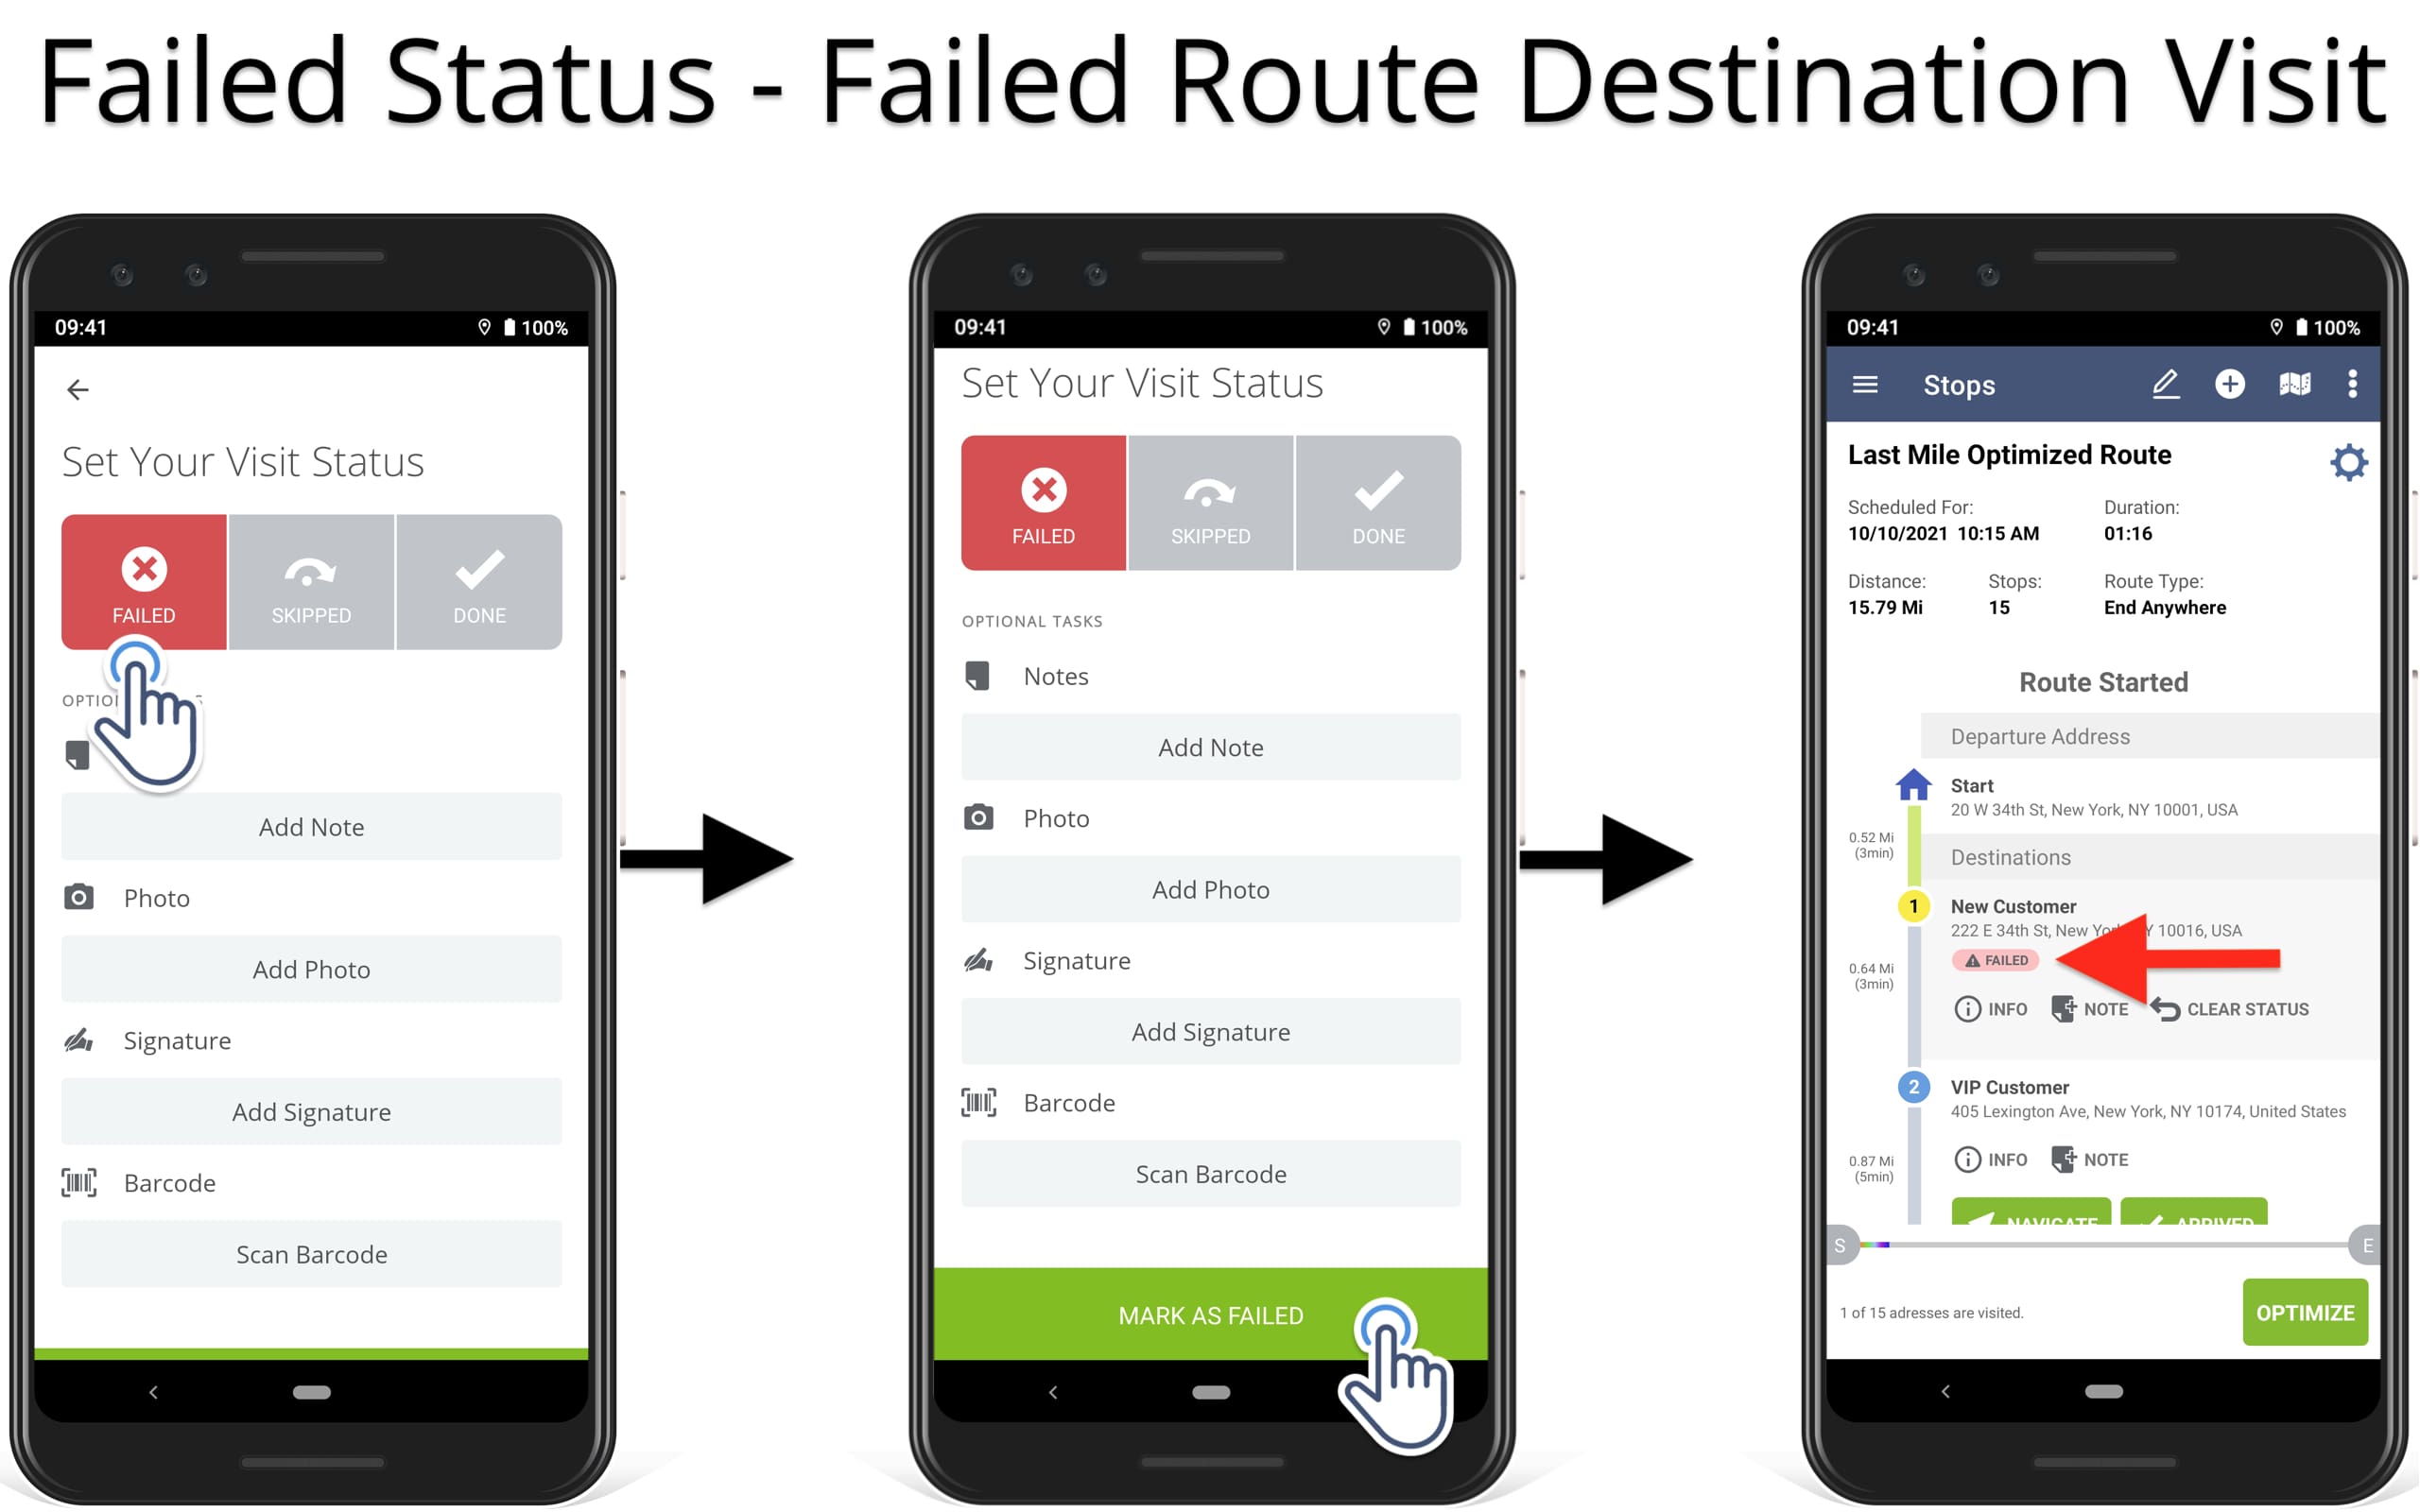 Set Failed route delivery status for not completed orders and not visited route destinations.